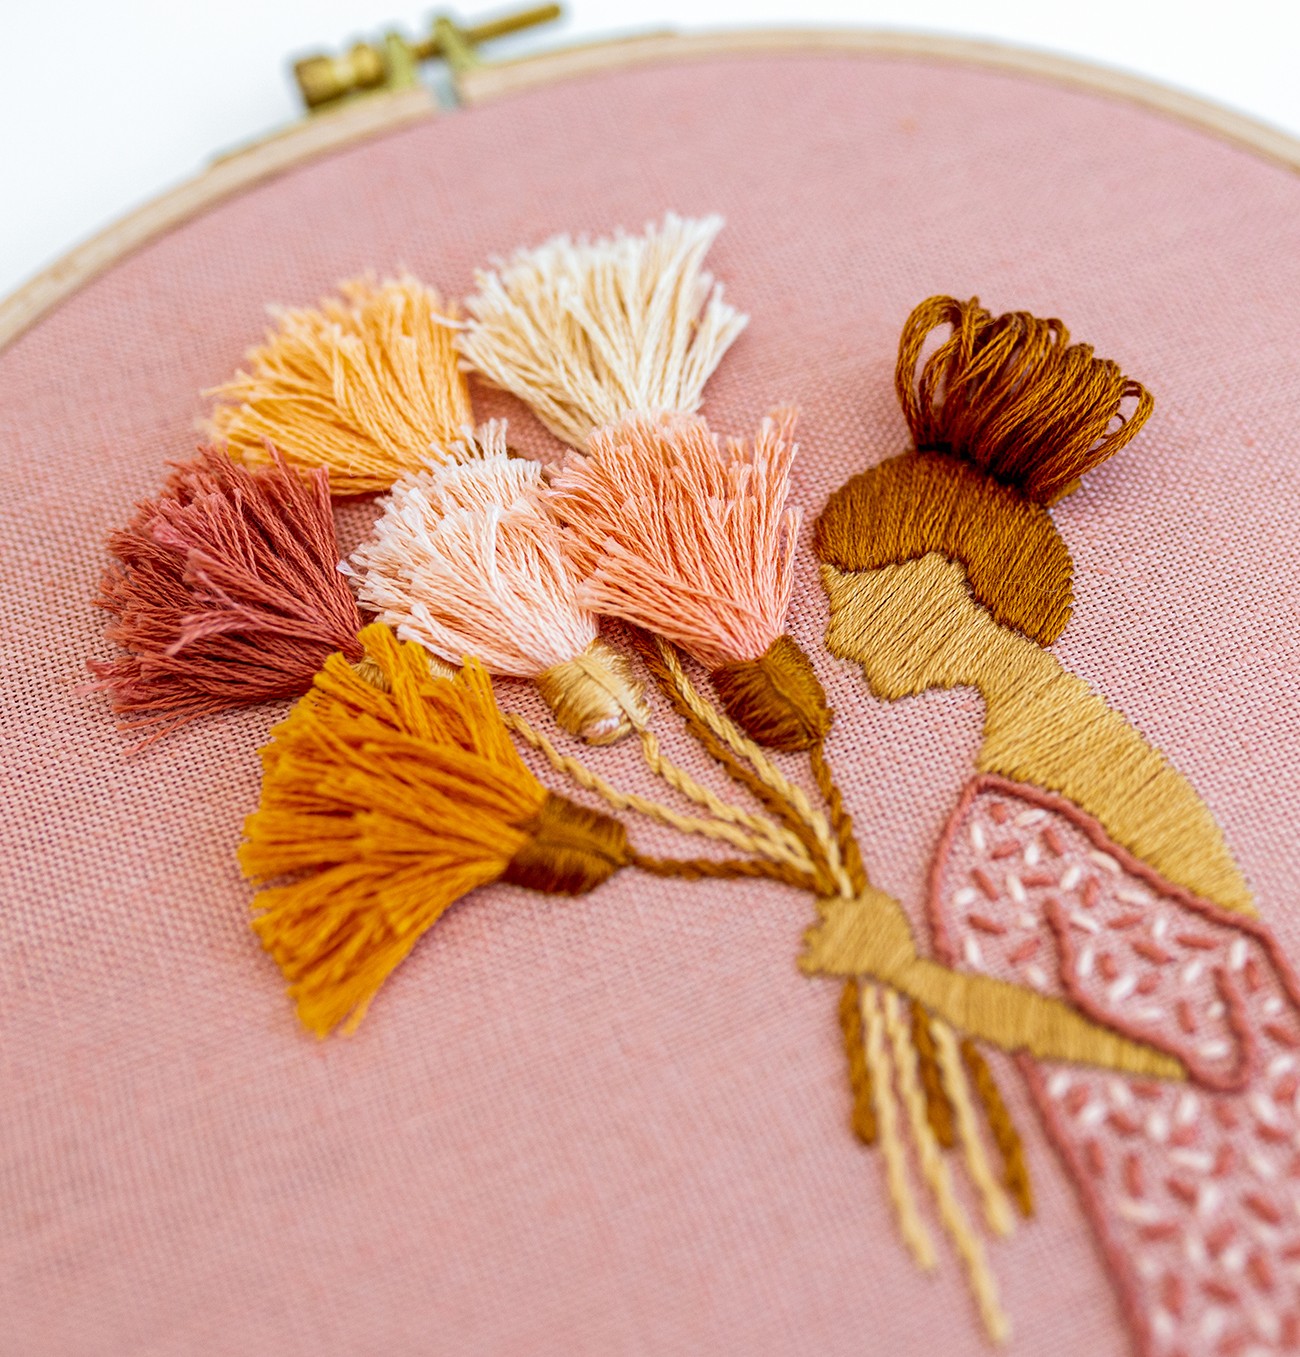 This is a close up image of the thread bundles in The Florist pattern.